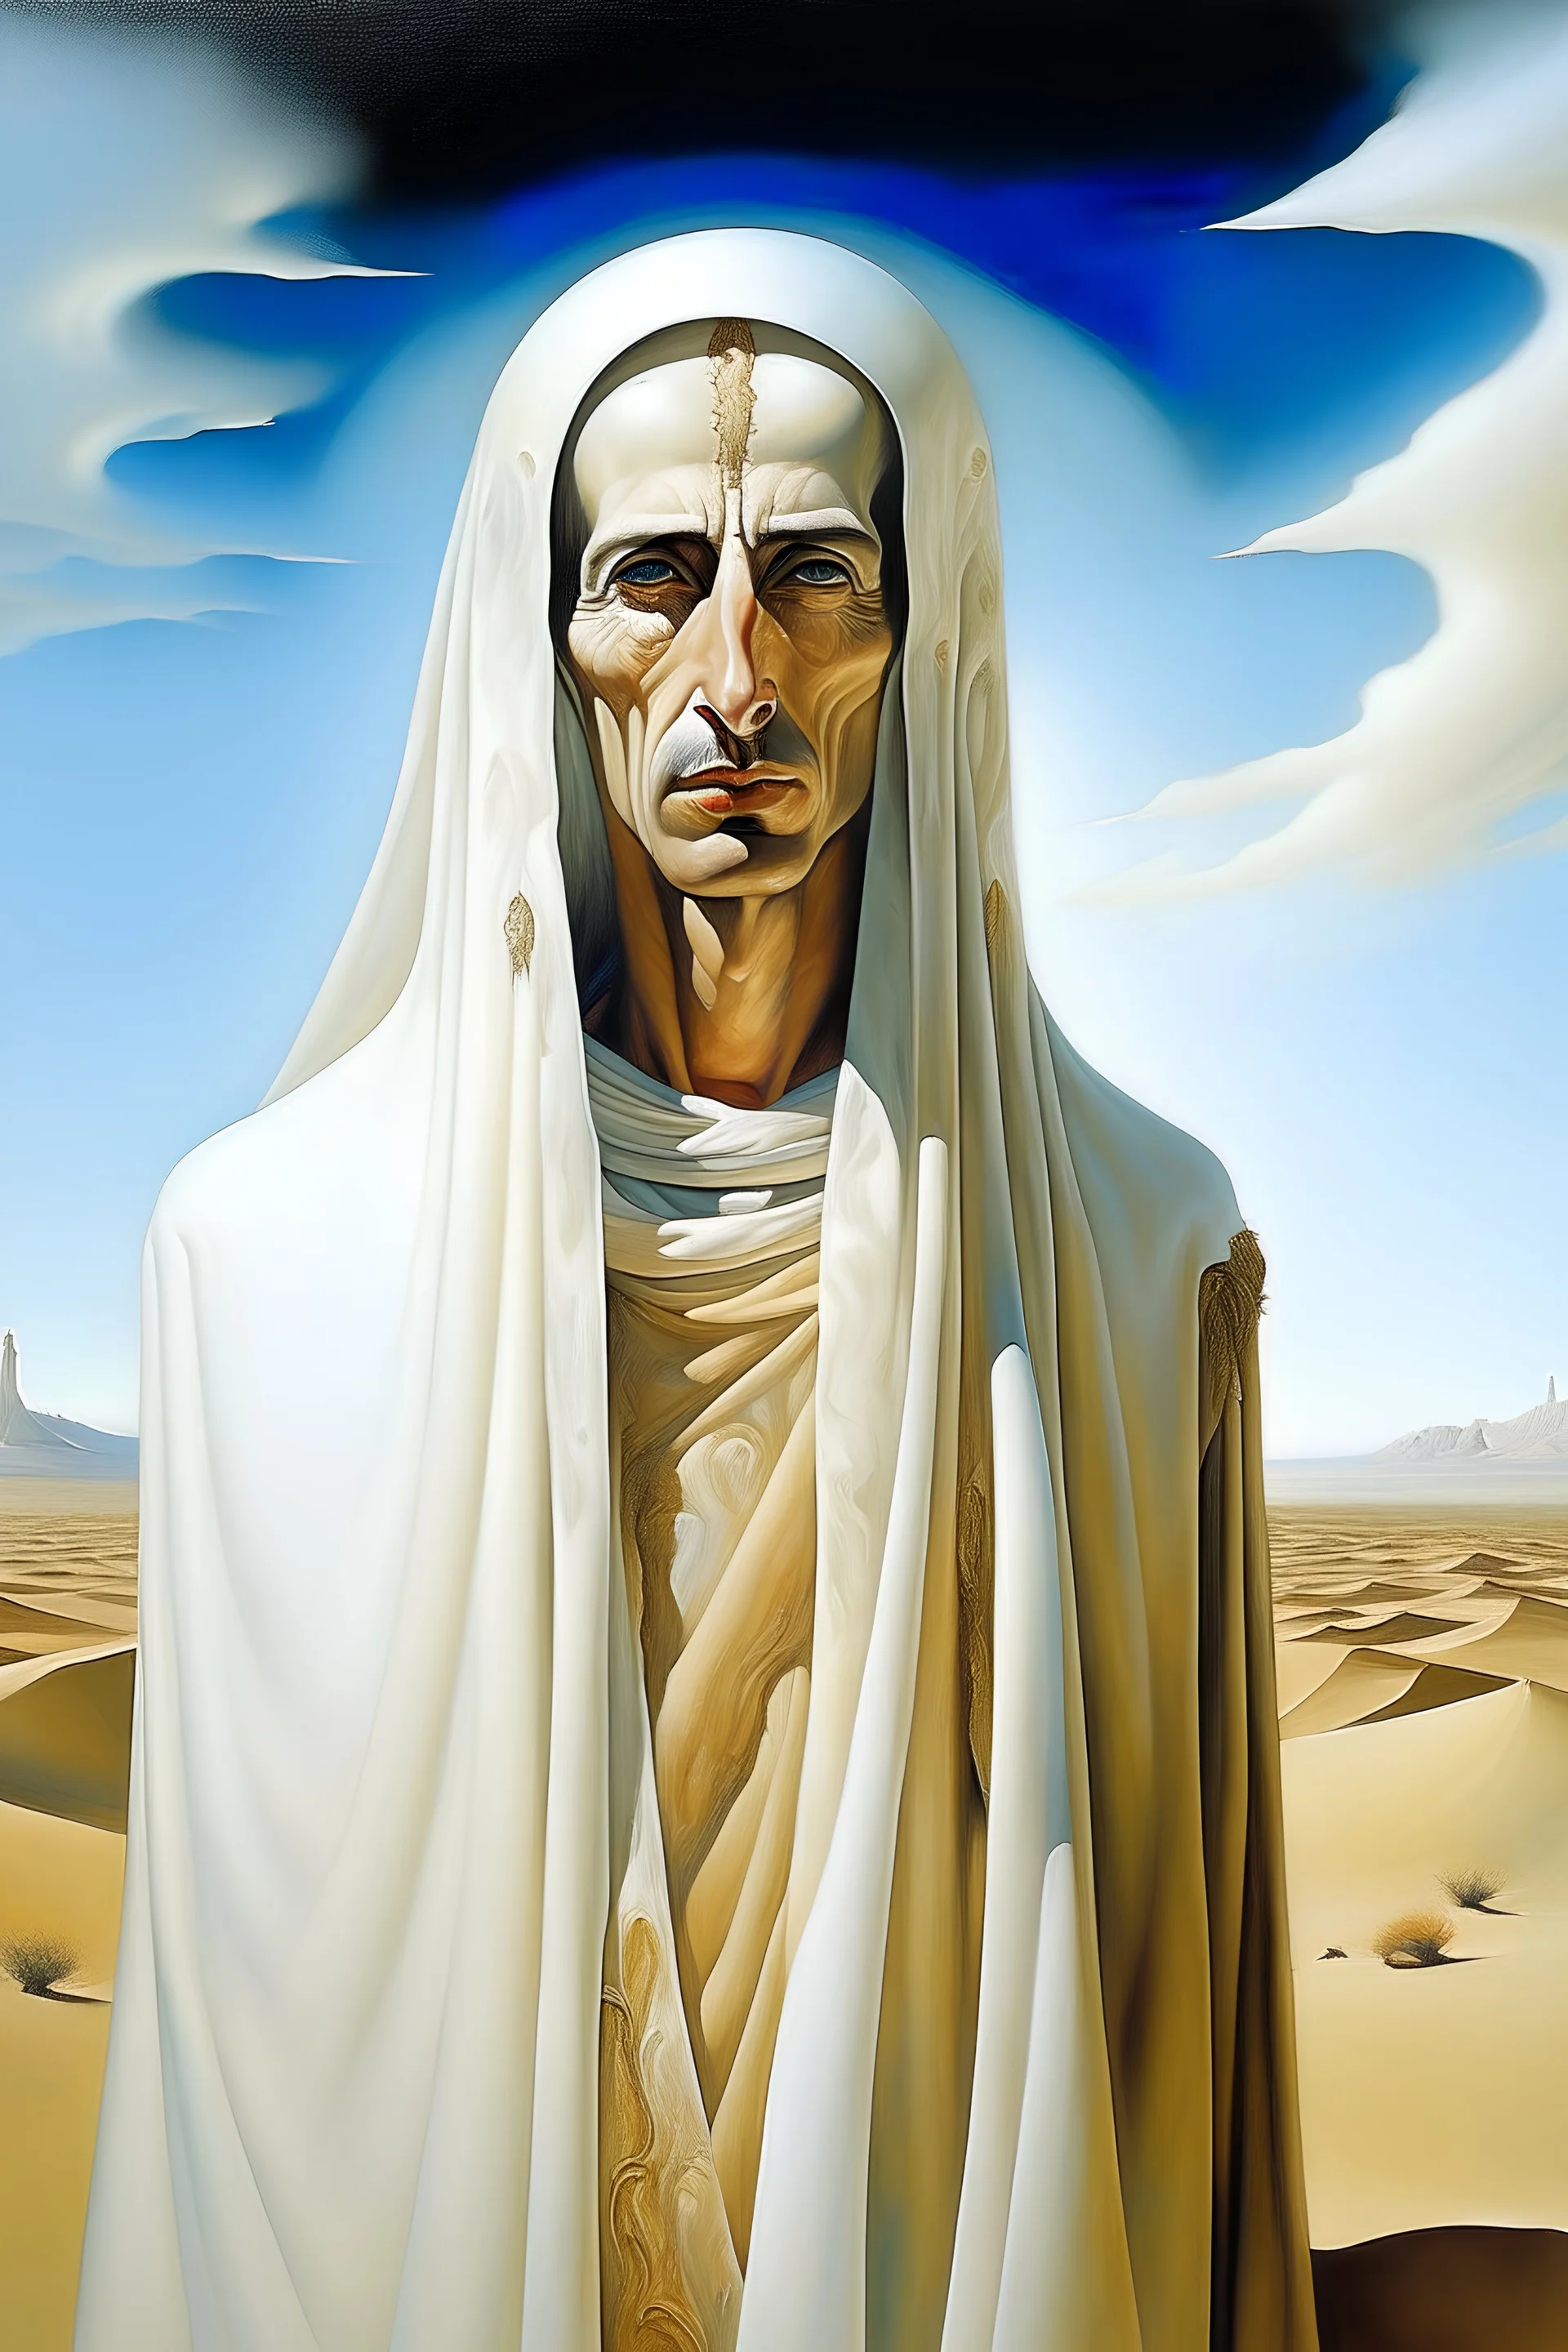 portrait of tall god looks like human but 4 times bigger than normal humans with shining eyes in full clothes, clothes like Arabs in desert. Their face is covered in white shall only their eyes are out. by Dali